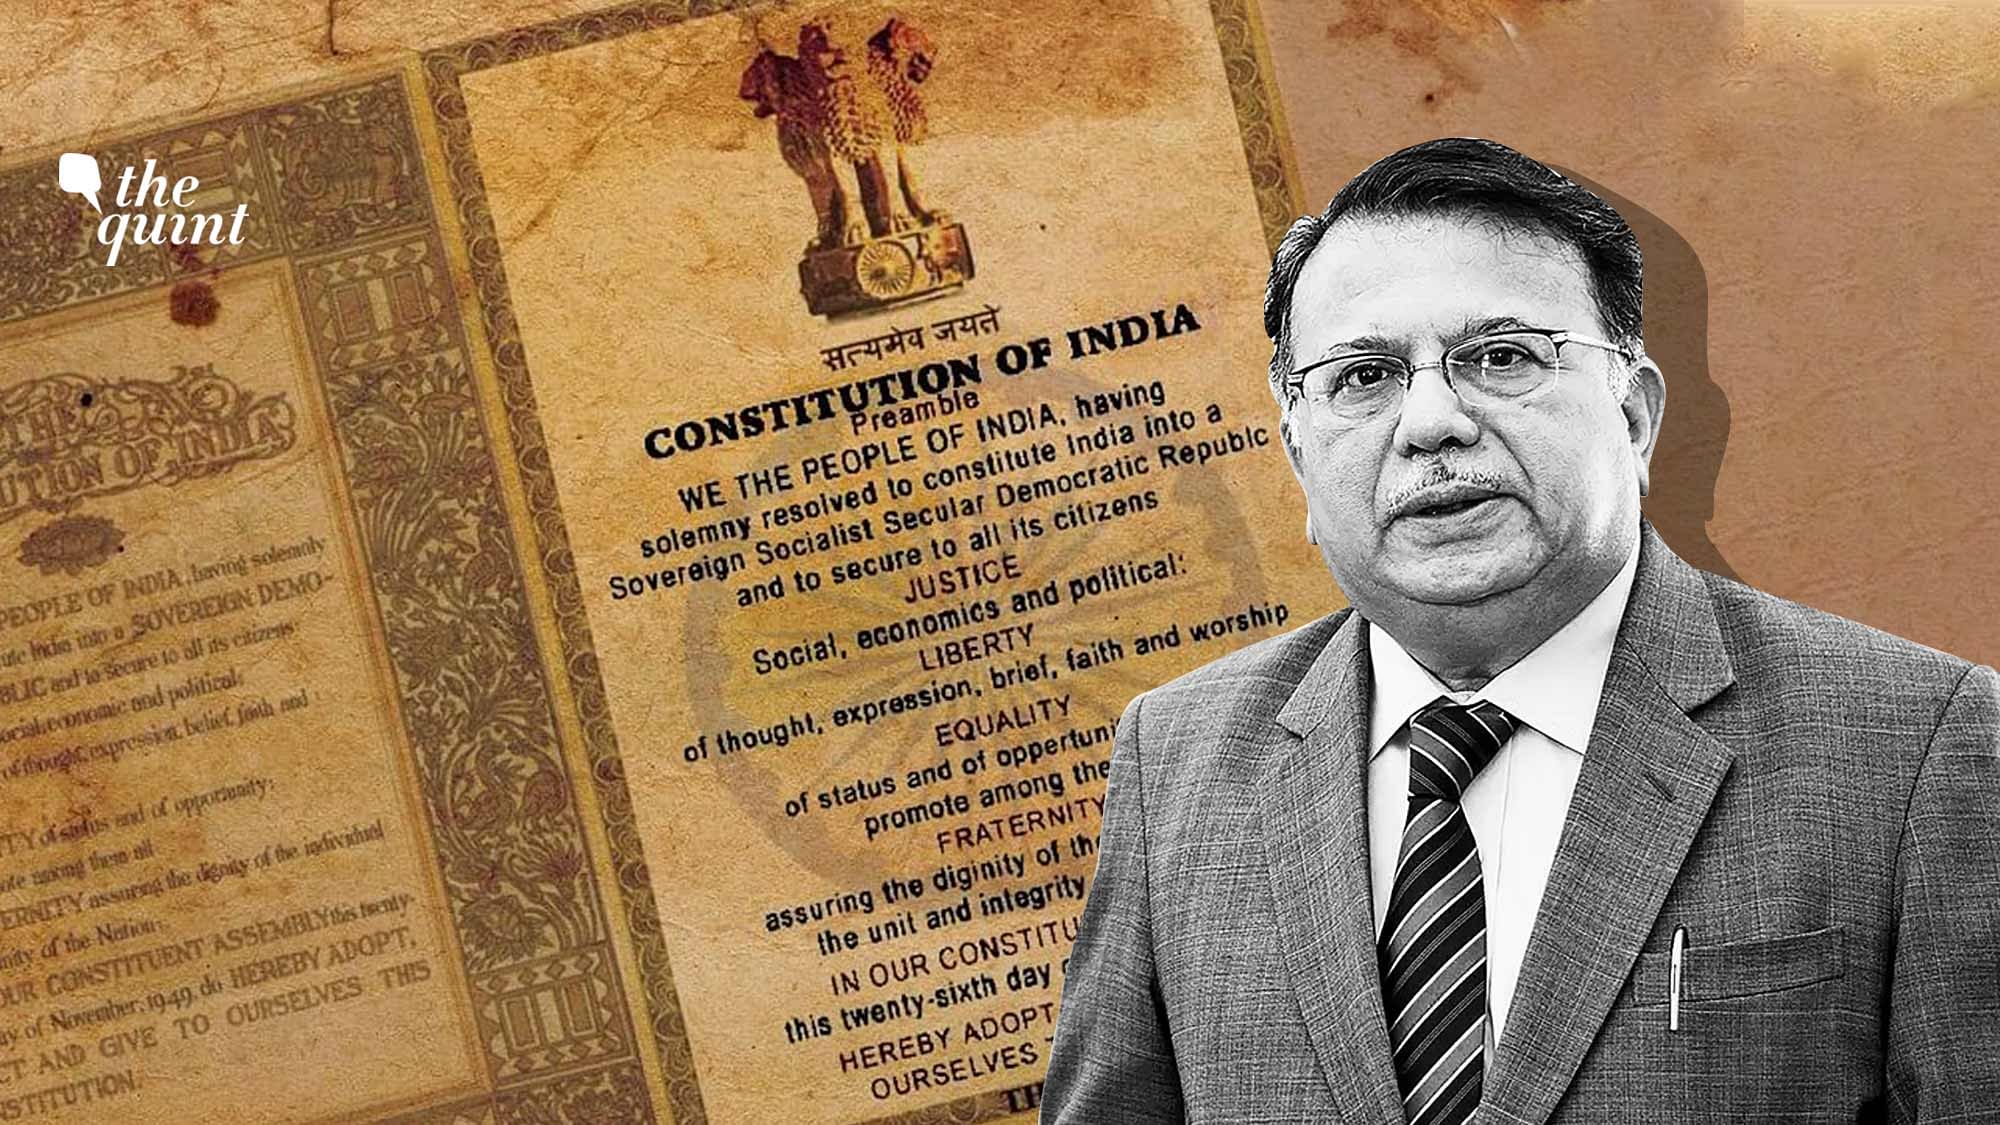 Former Chief Justice of Delhi High Court, Justice AP Shah, gave the Justice Hosbet Suresh Memorial Lecture on Friday, 18 September, in which he talked about how India is not living up to the principles of a liberal democratic republic.